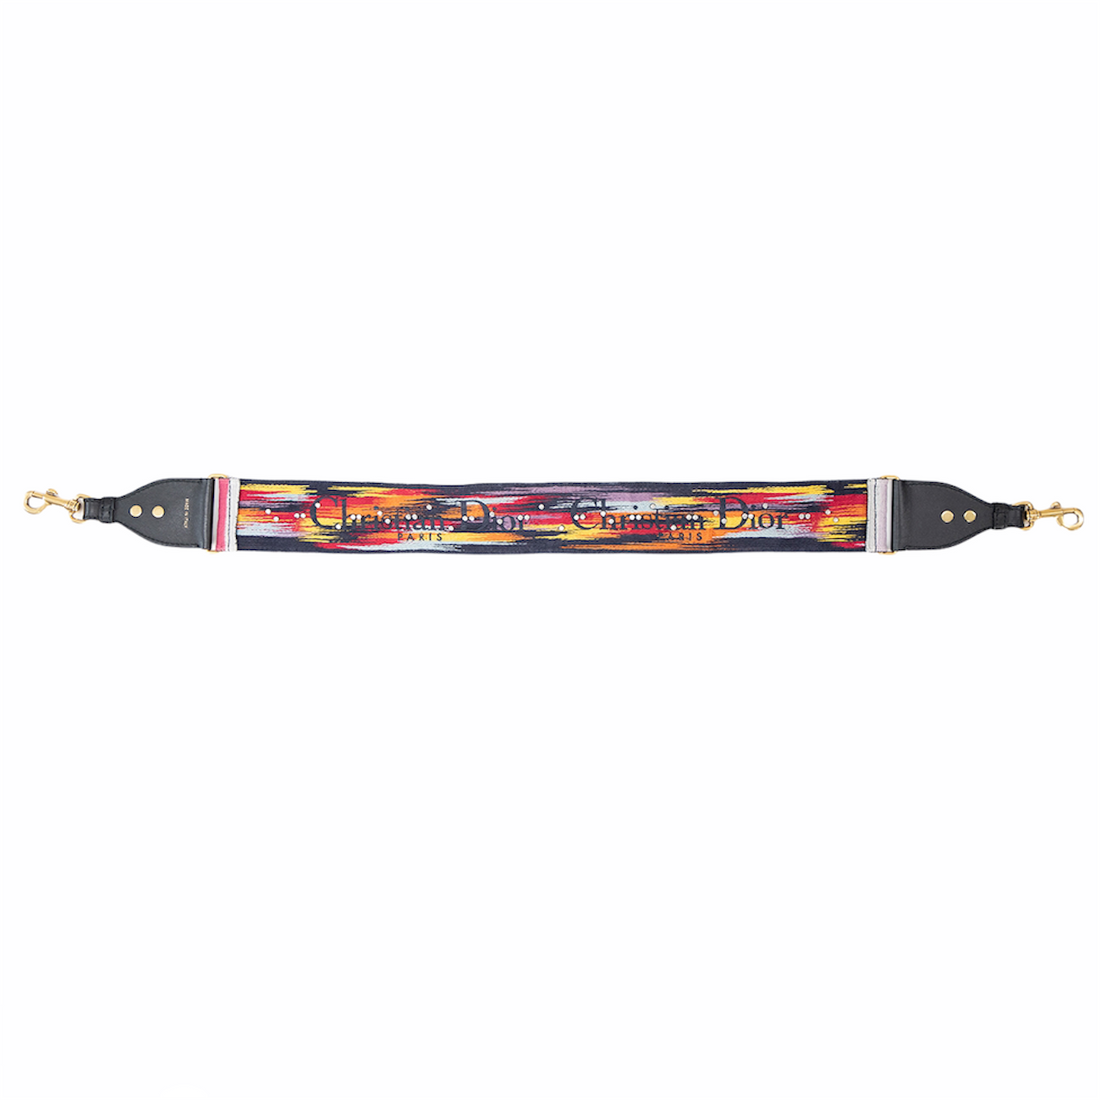 Christian Dior Colorful shoulder strap with metal medallions